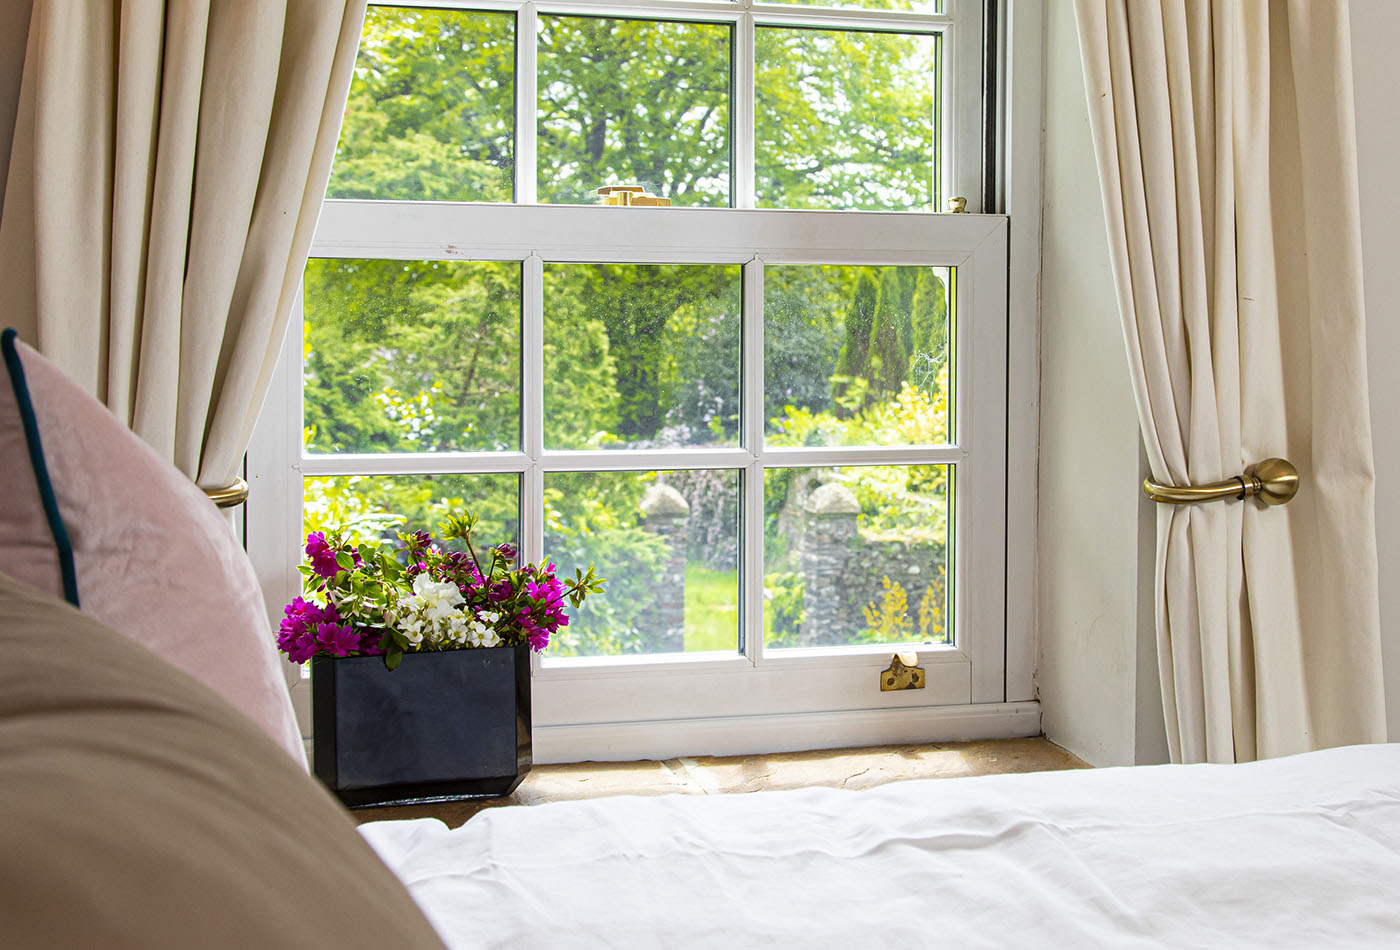 An idyllic view from the master bedroom